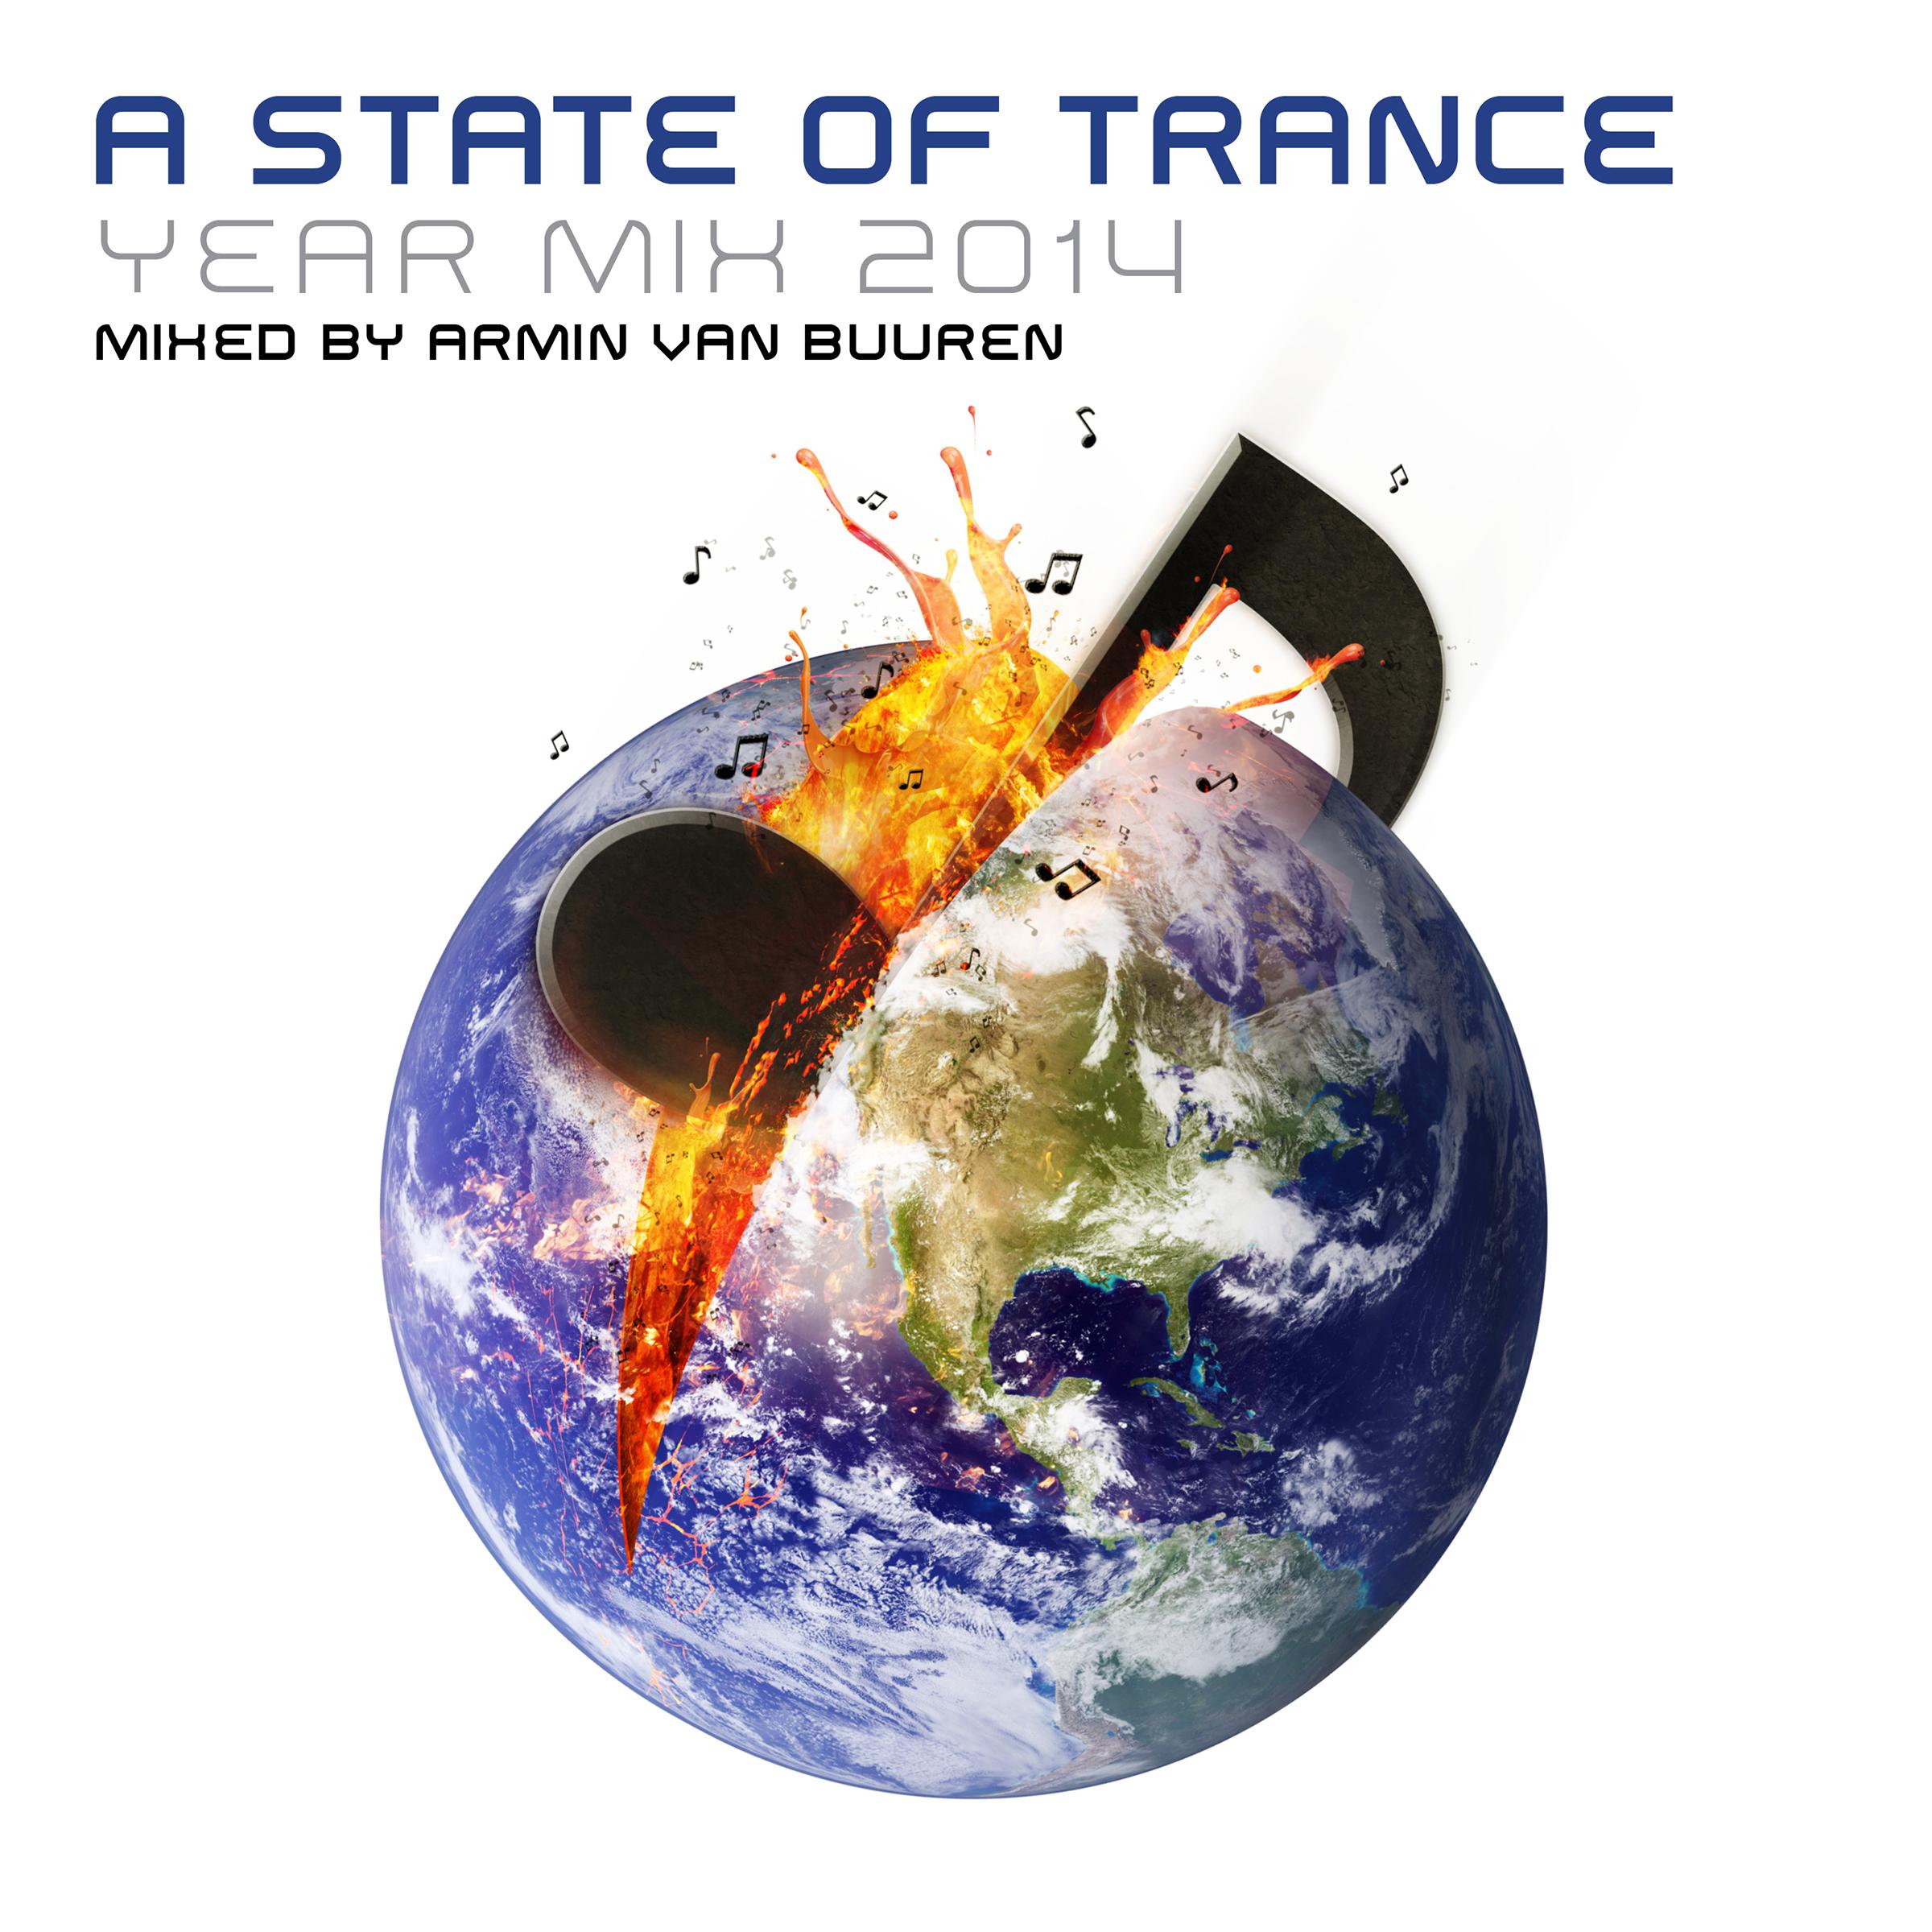 Armin van Buuren - A State of Trance Year Mix 2014 - The Moral Of The Story (Outro)